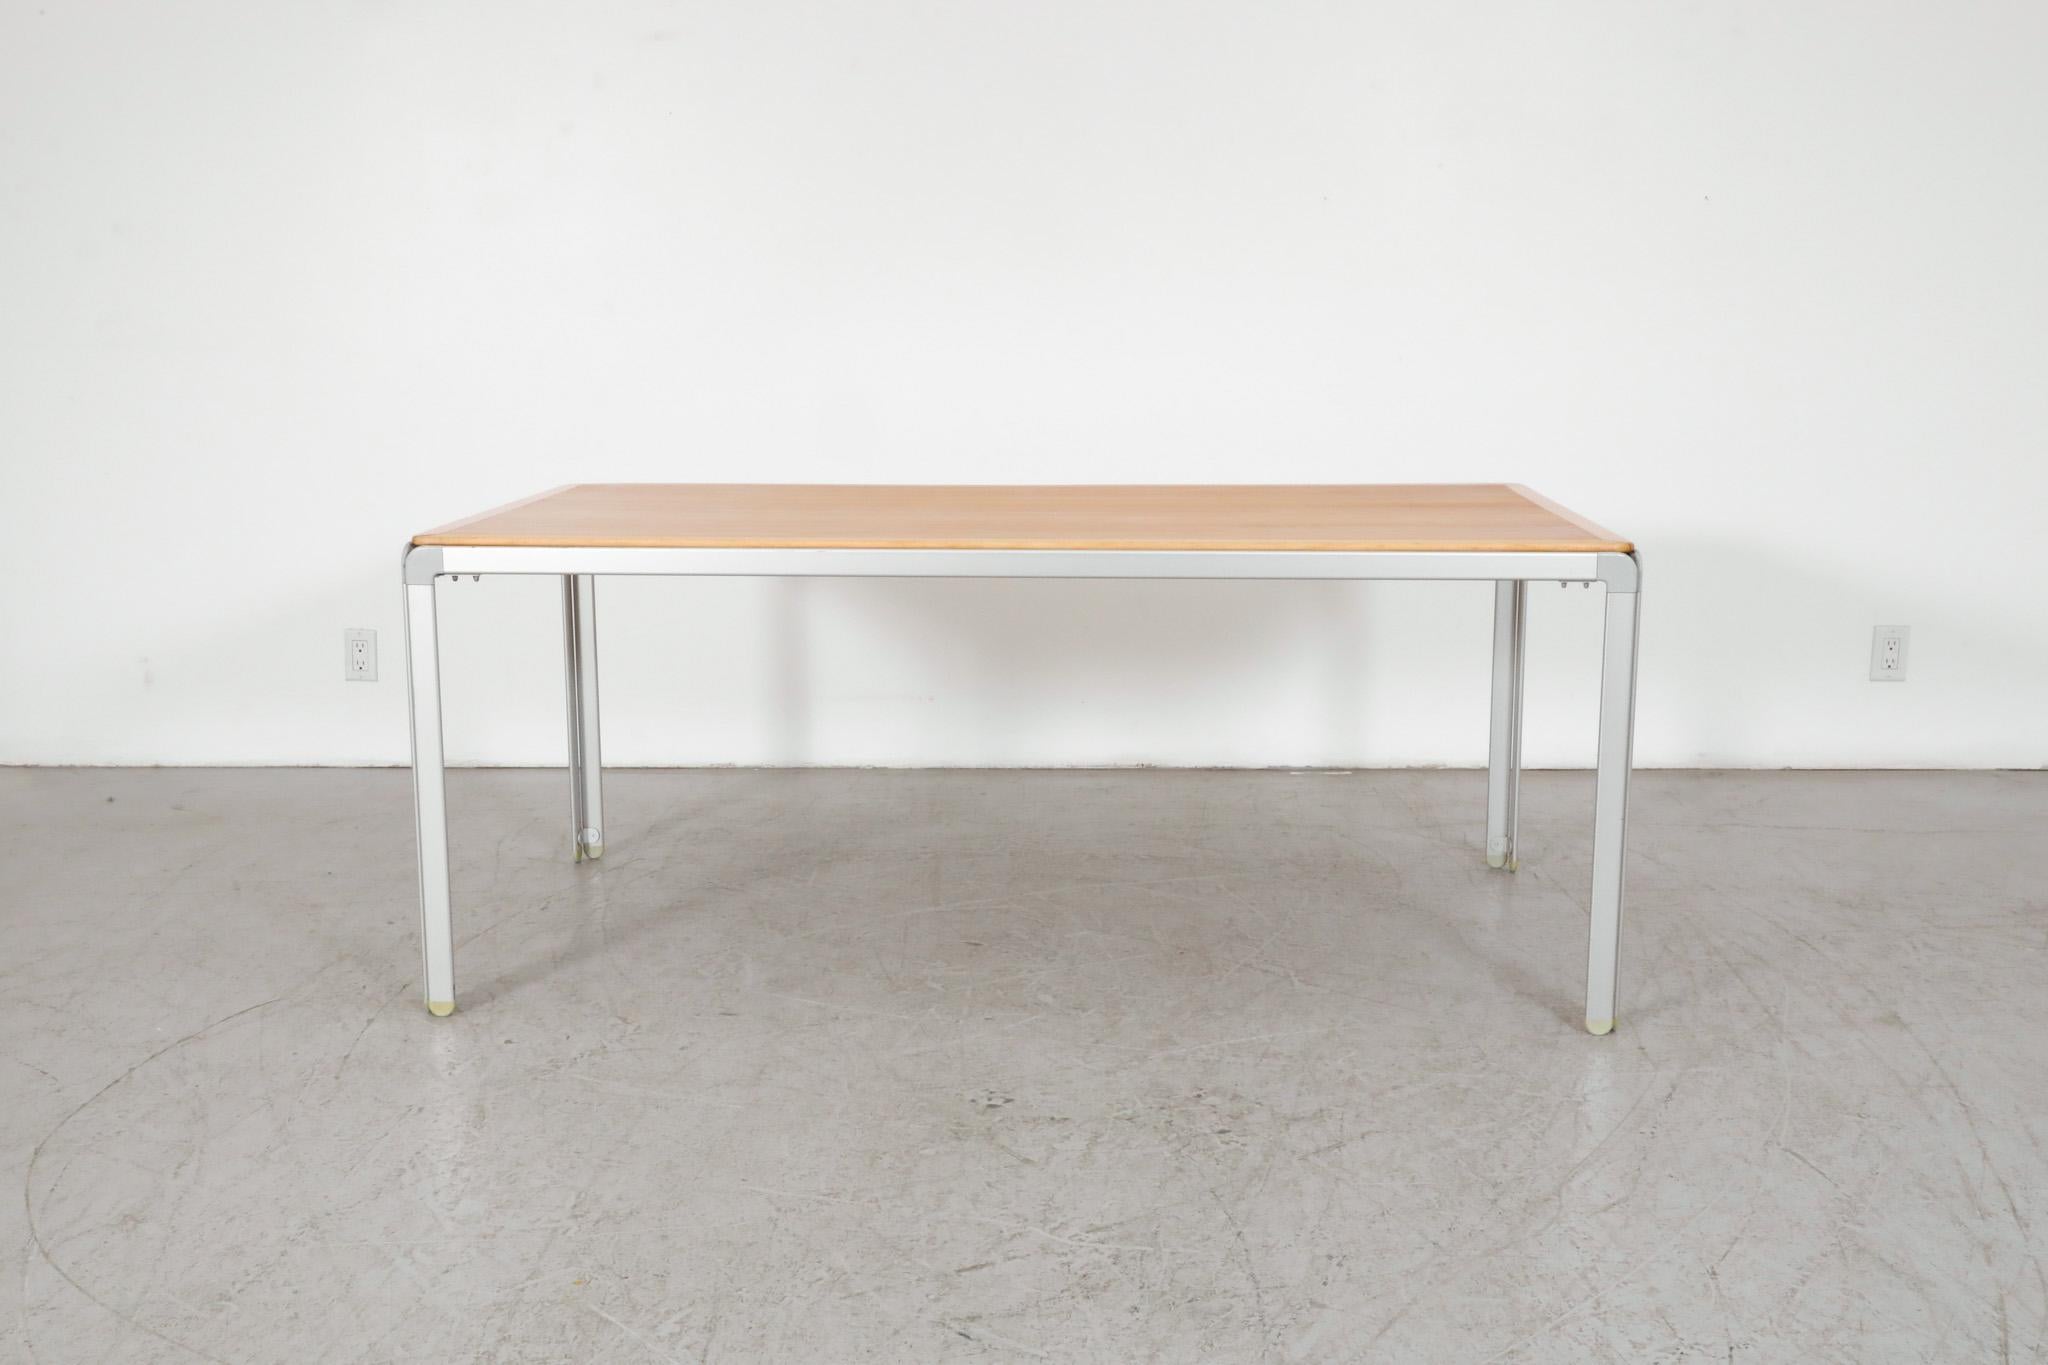 Mid-Century table or writing desk designed by Danish designer Arne Jacobsen in 1971 as part of the DJOB furniture system for Denmark's National Bank. The office furniture series DJOB was about to be put into production when Arne Jacobsen passed